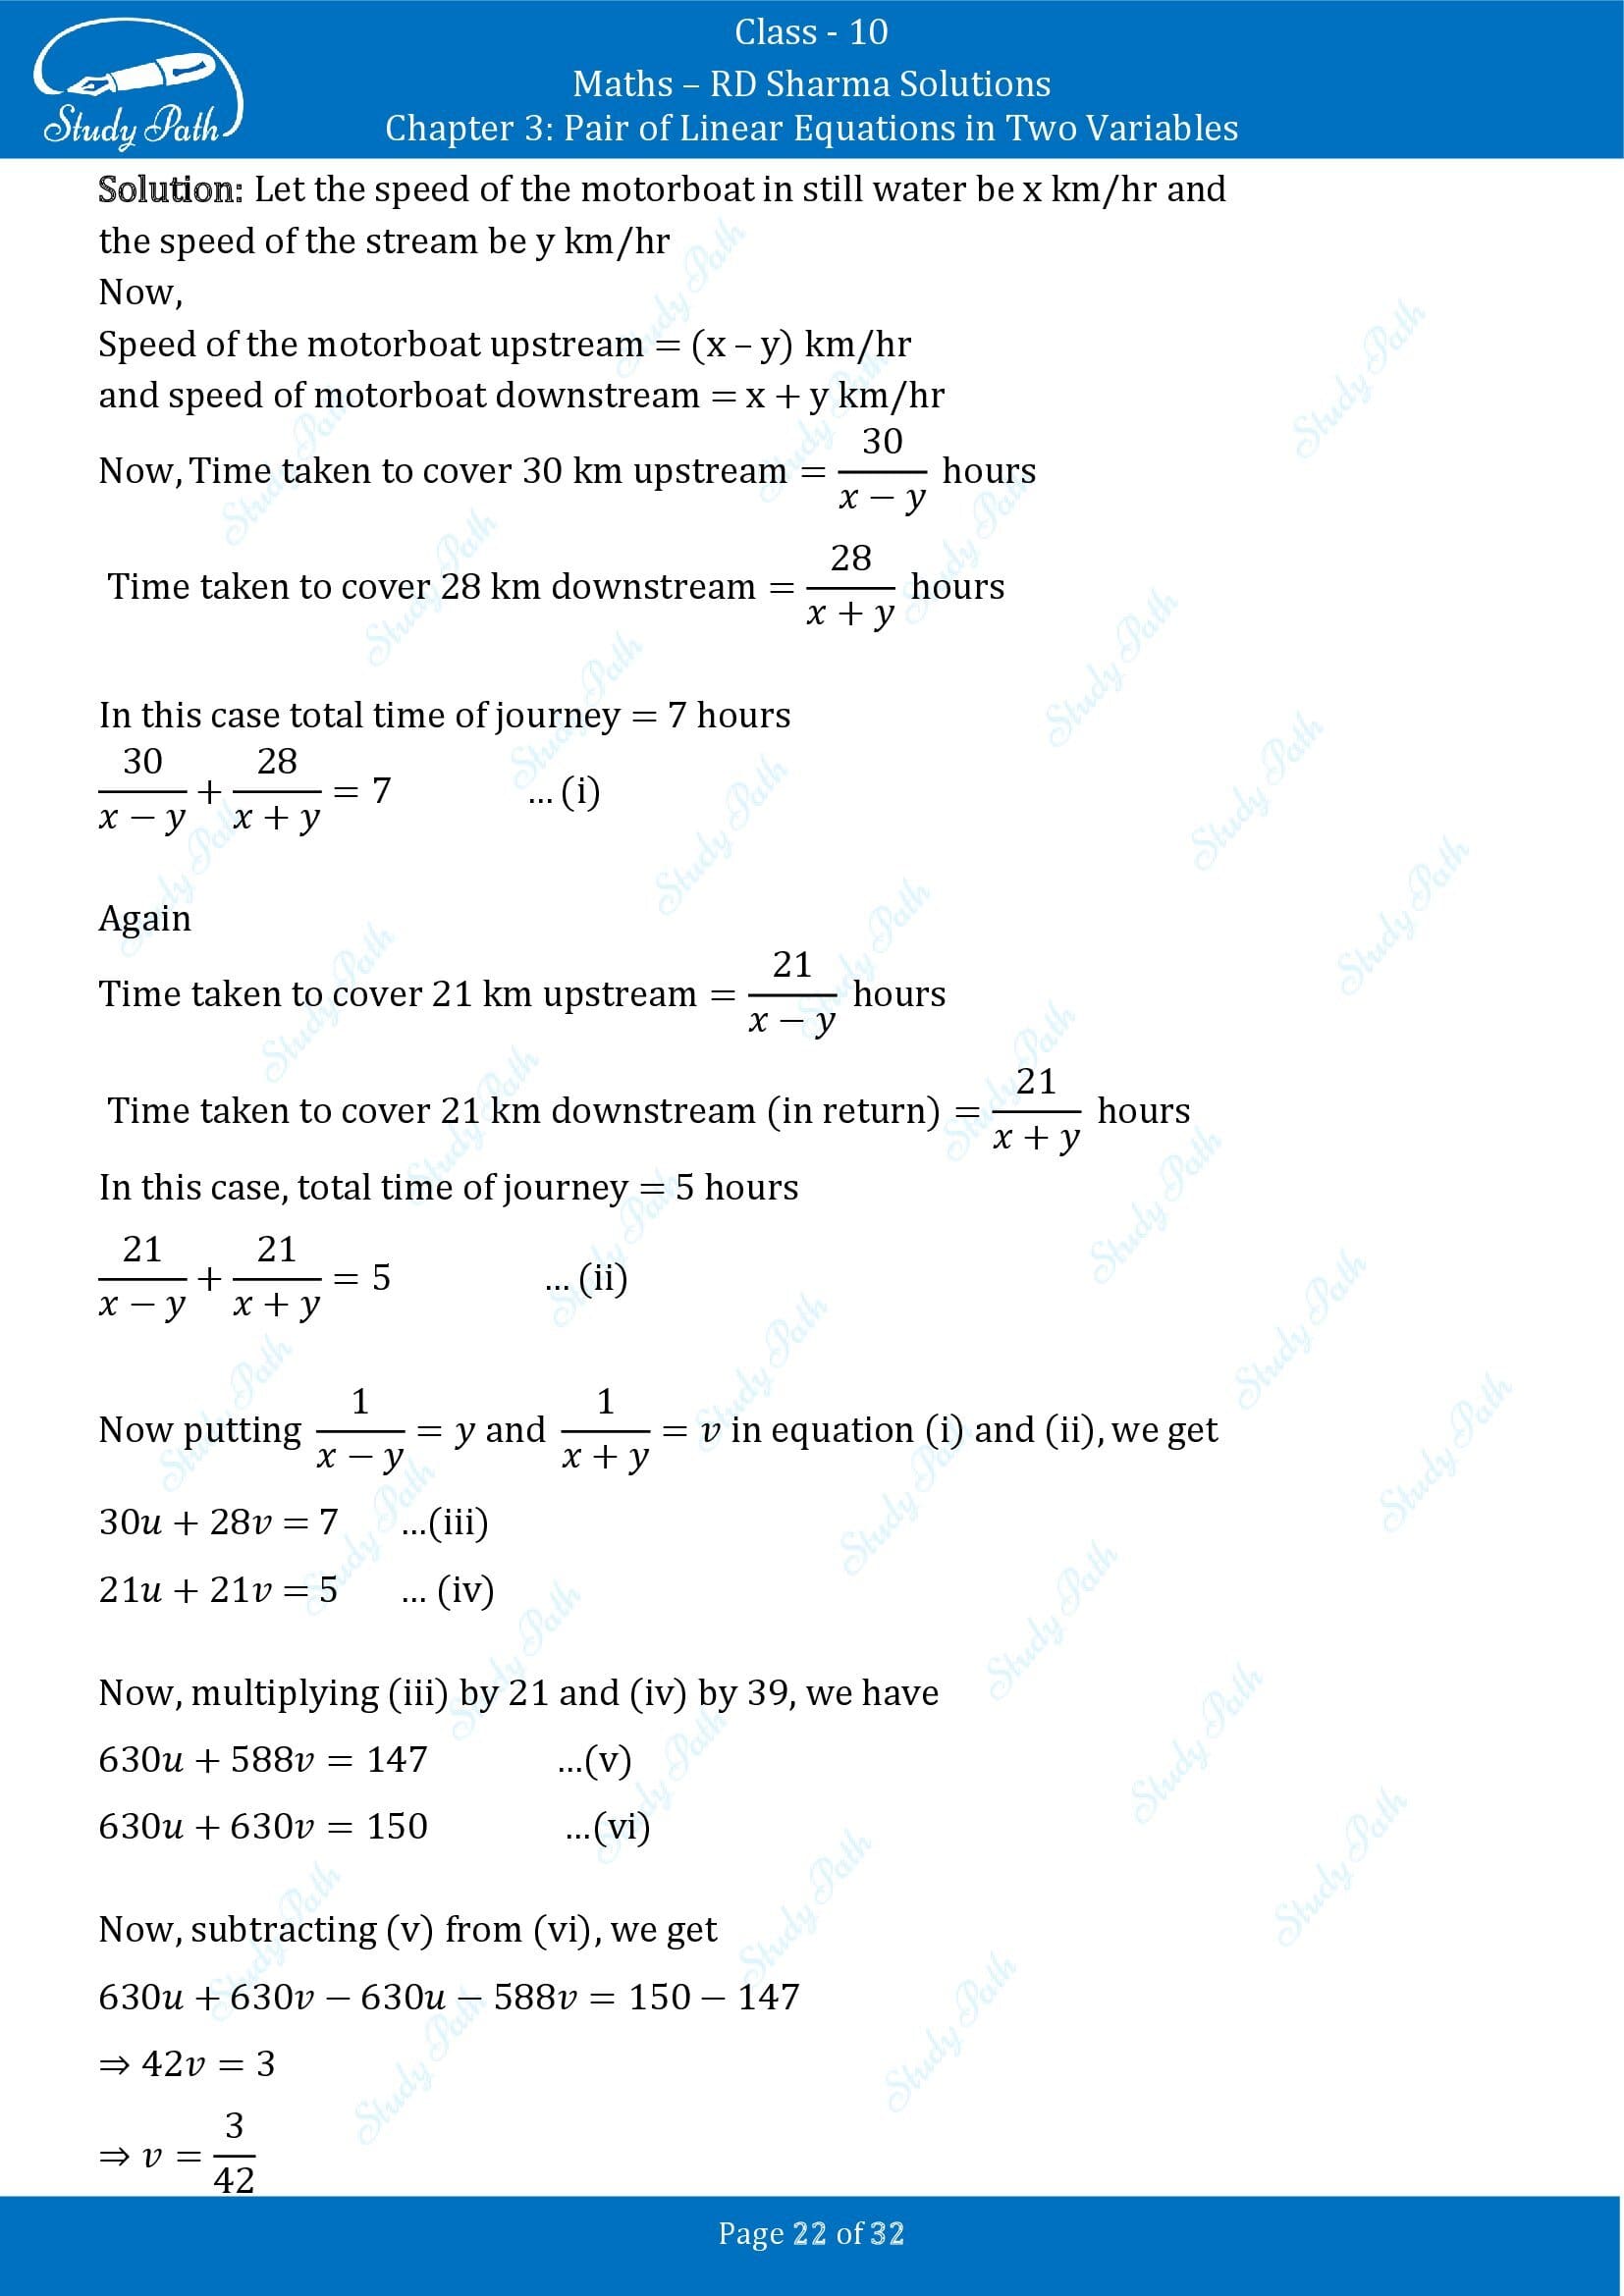 RD Sharma Solutions Class 10 Chapter 3 Pair of Linear Equations in Two Variables Exercise 3.10 00022